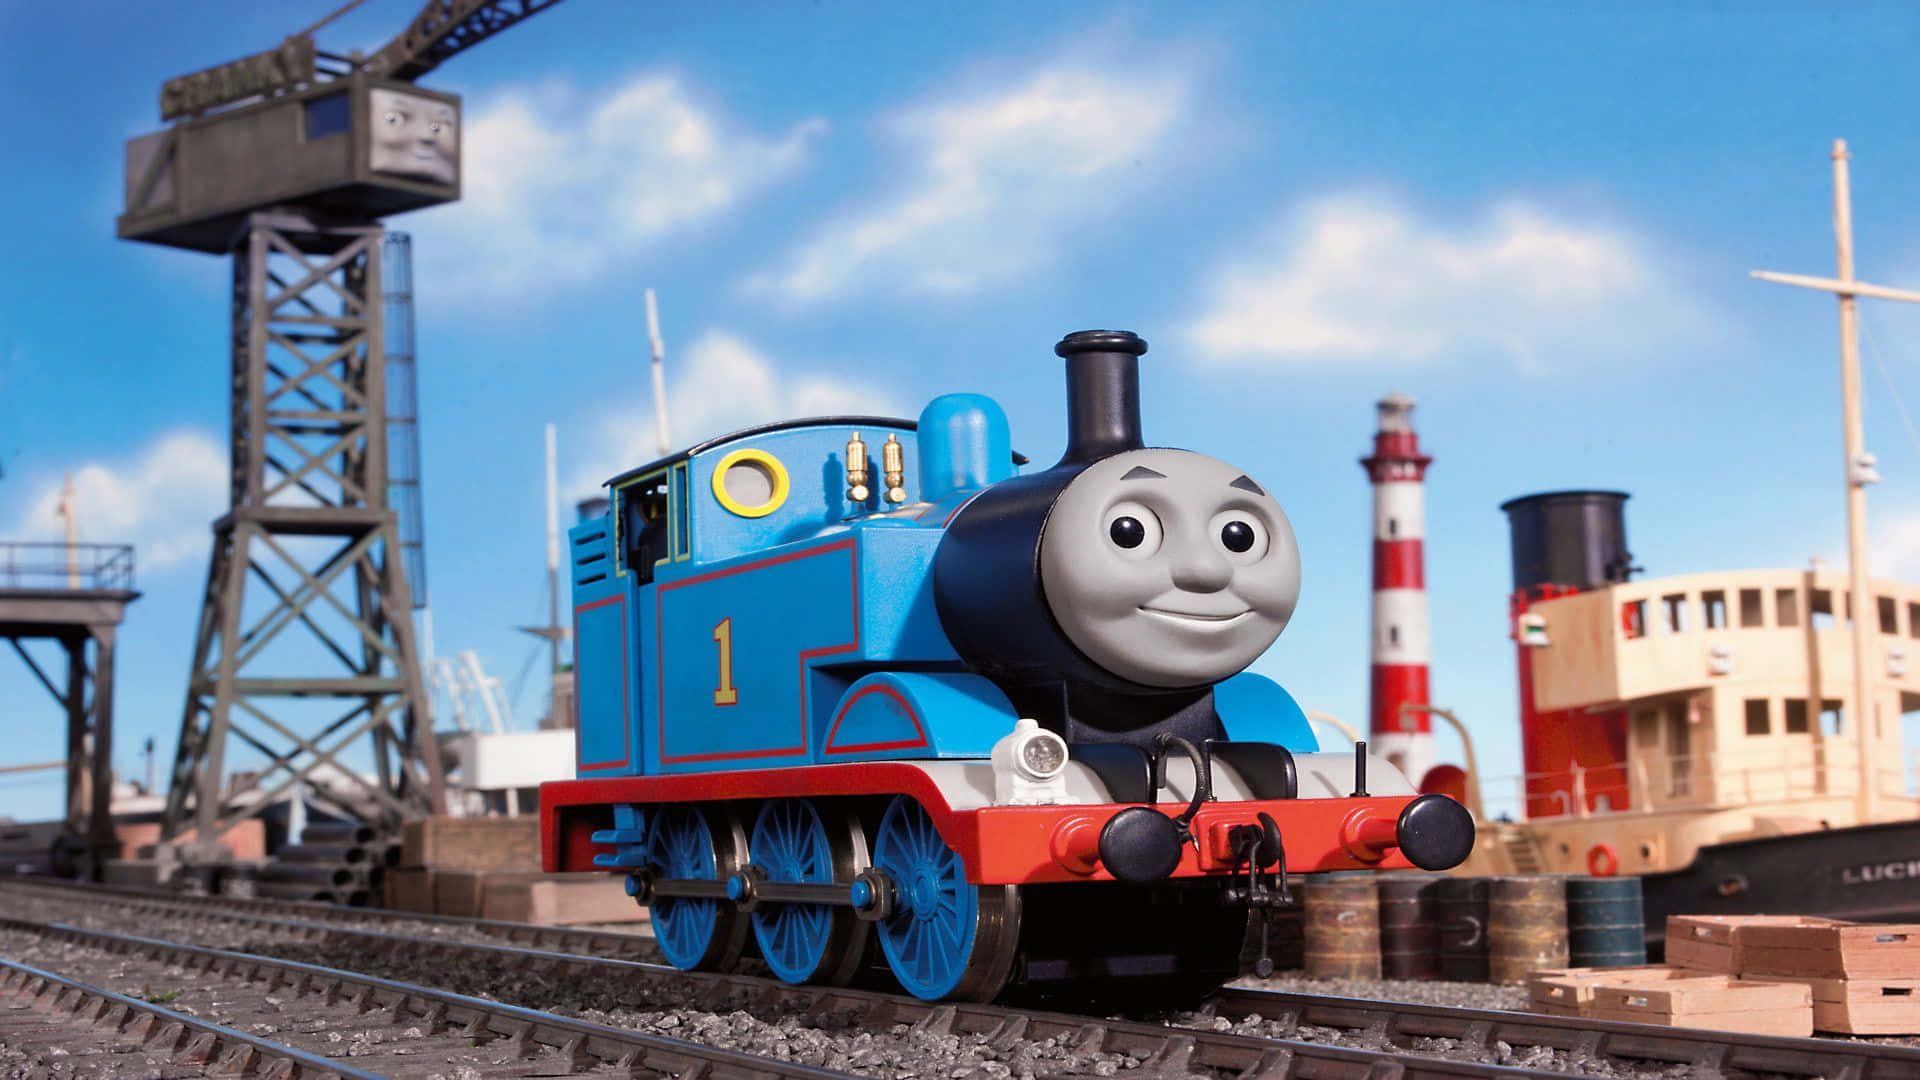 Buildings In Thomas And Friends Wallpaper